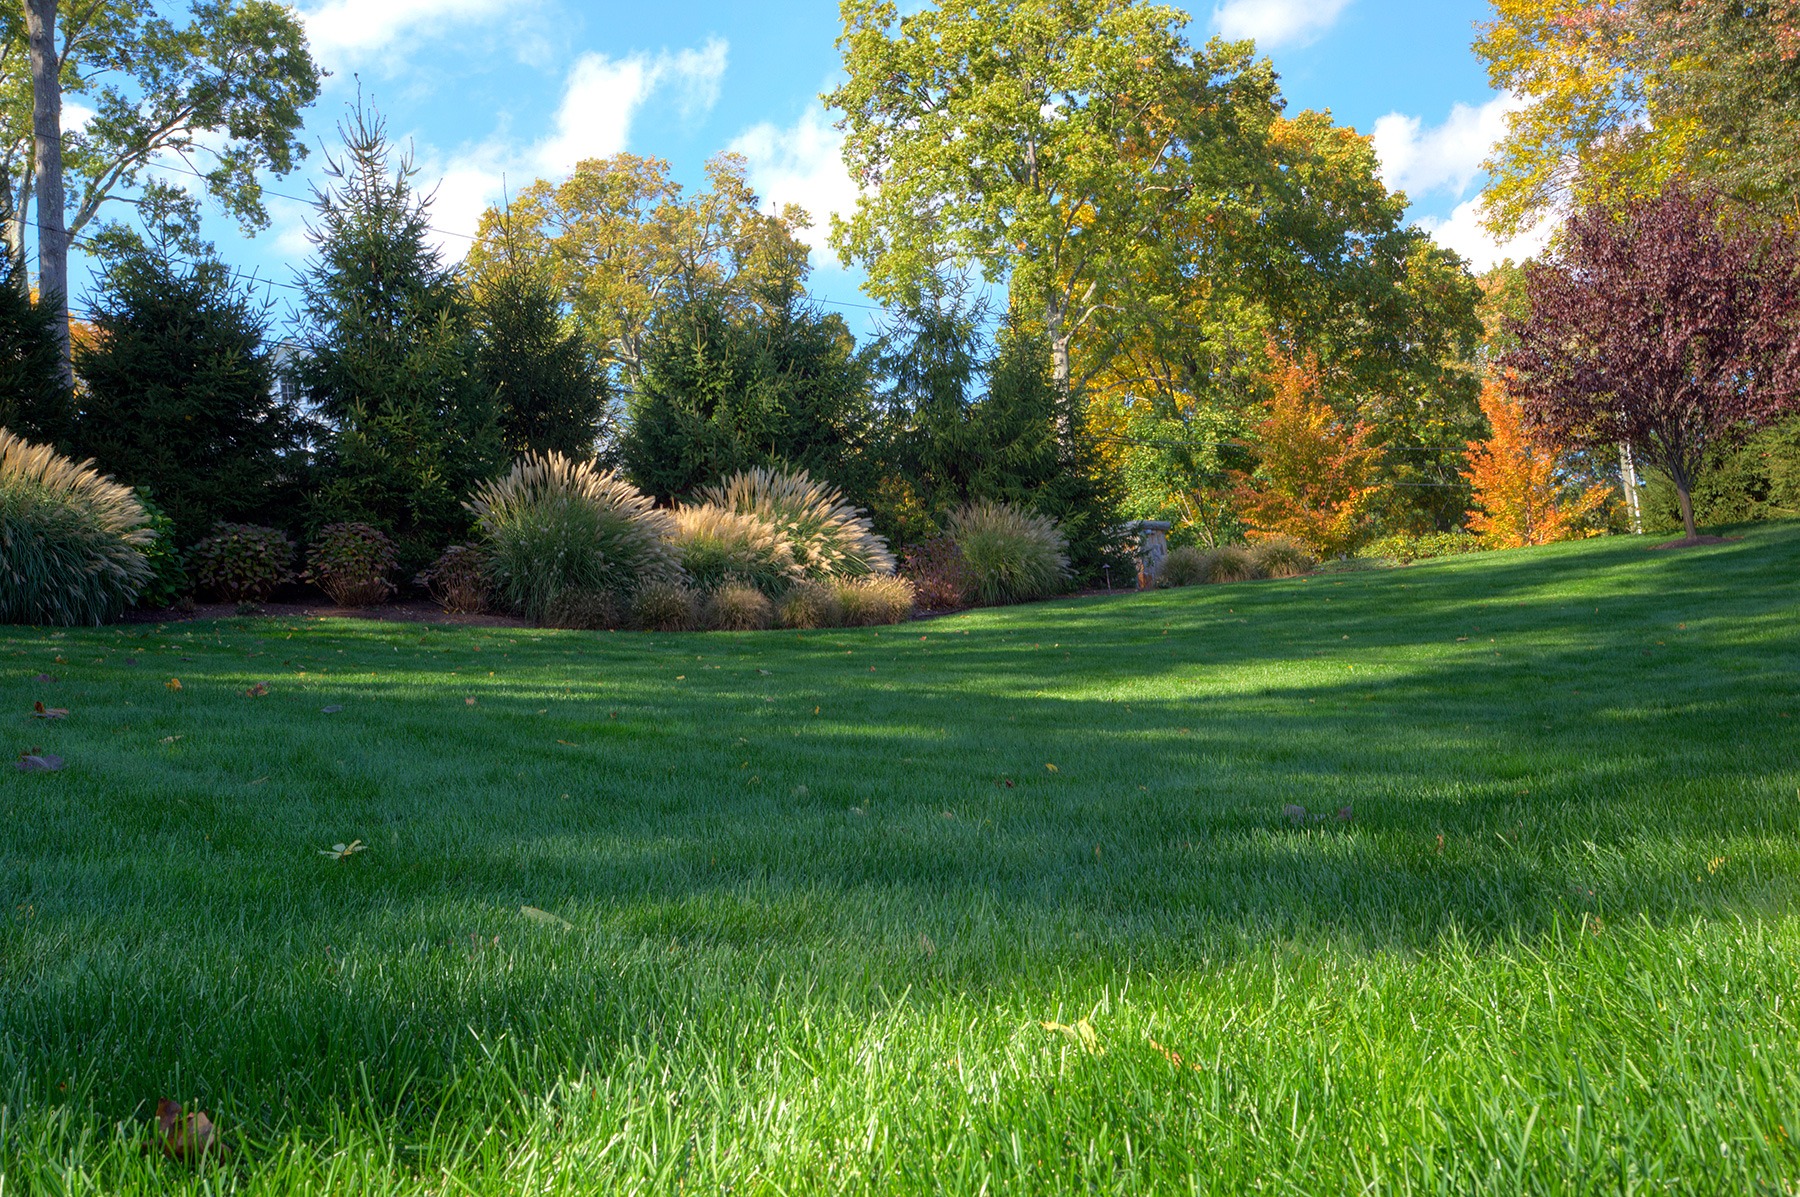 A verdant lawn with shadows stretches towards trees with autumn foliage and ornamental grasses under a bright blue sky with scattered clouds.